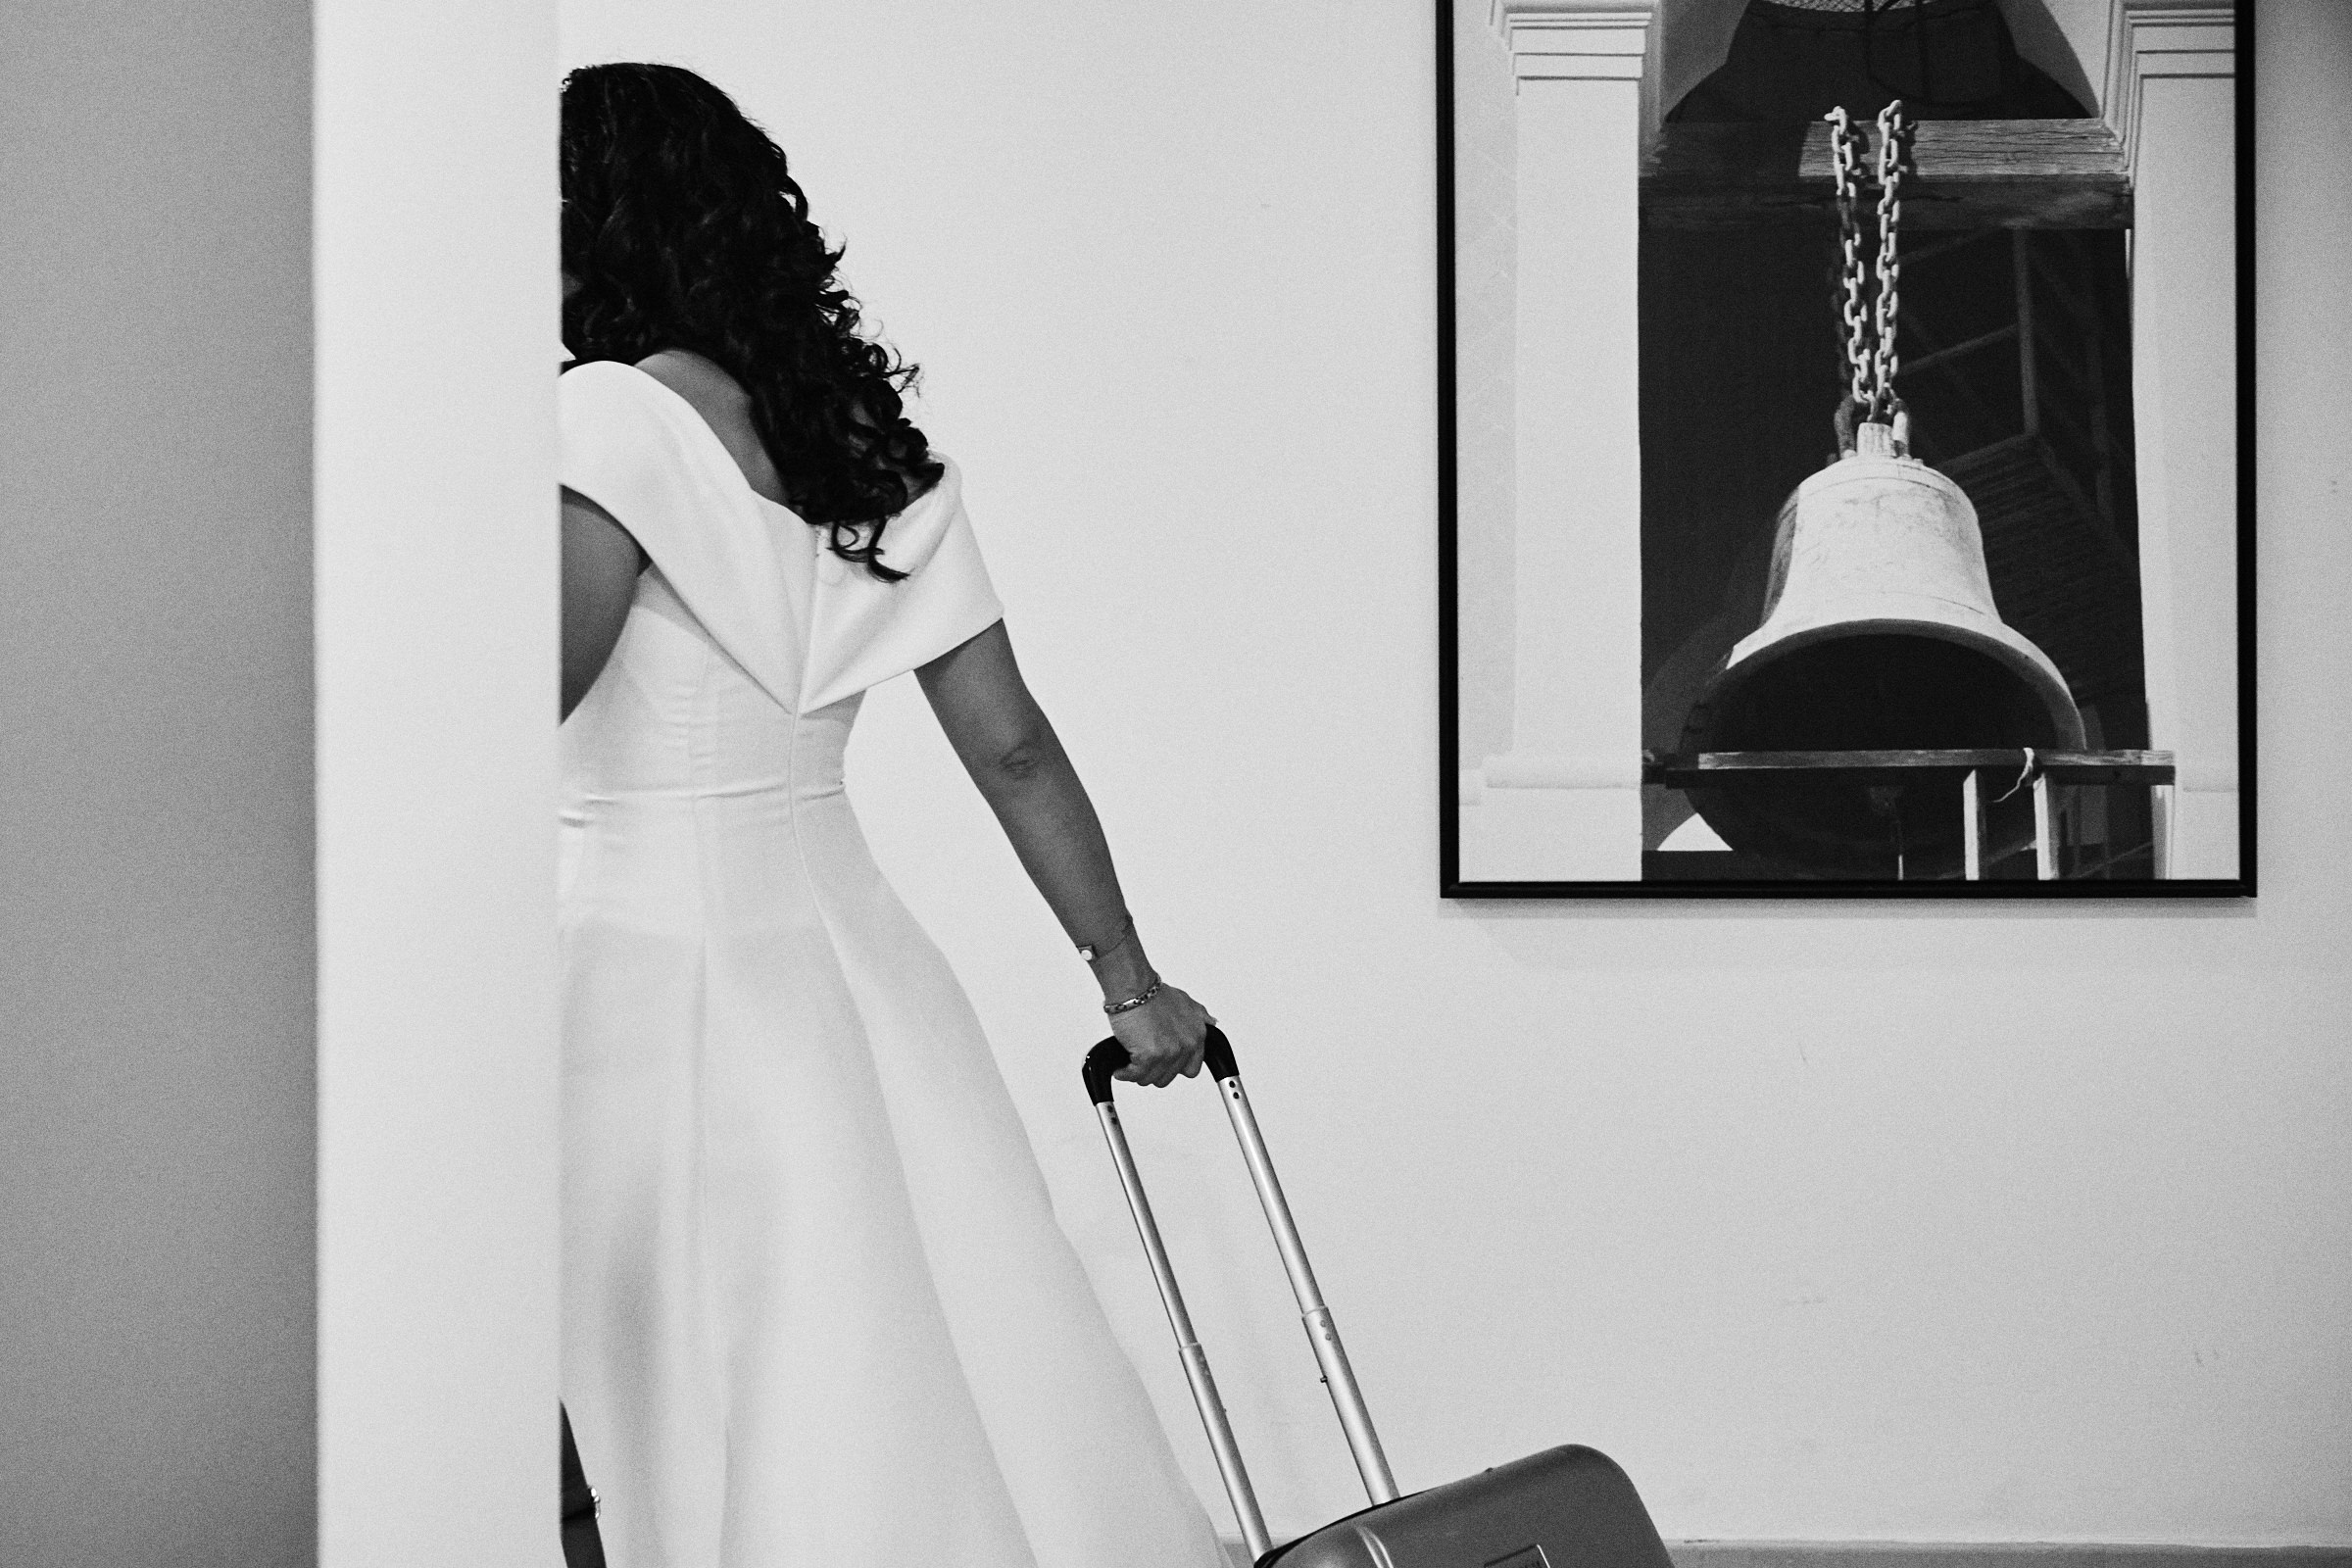 Bride Walks Away From Getting Ready At Pueblo Bonito Hotel While Bell Photo Is On The Wall